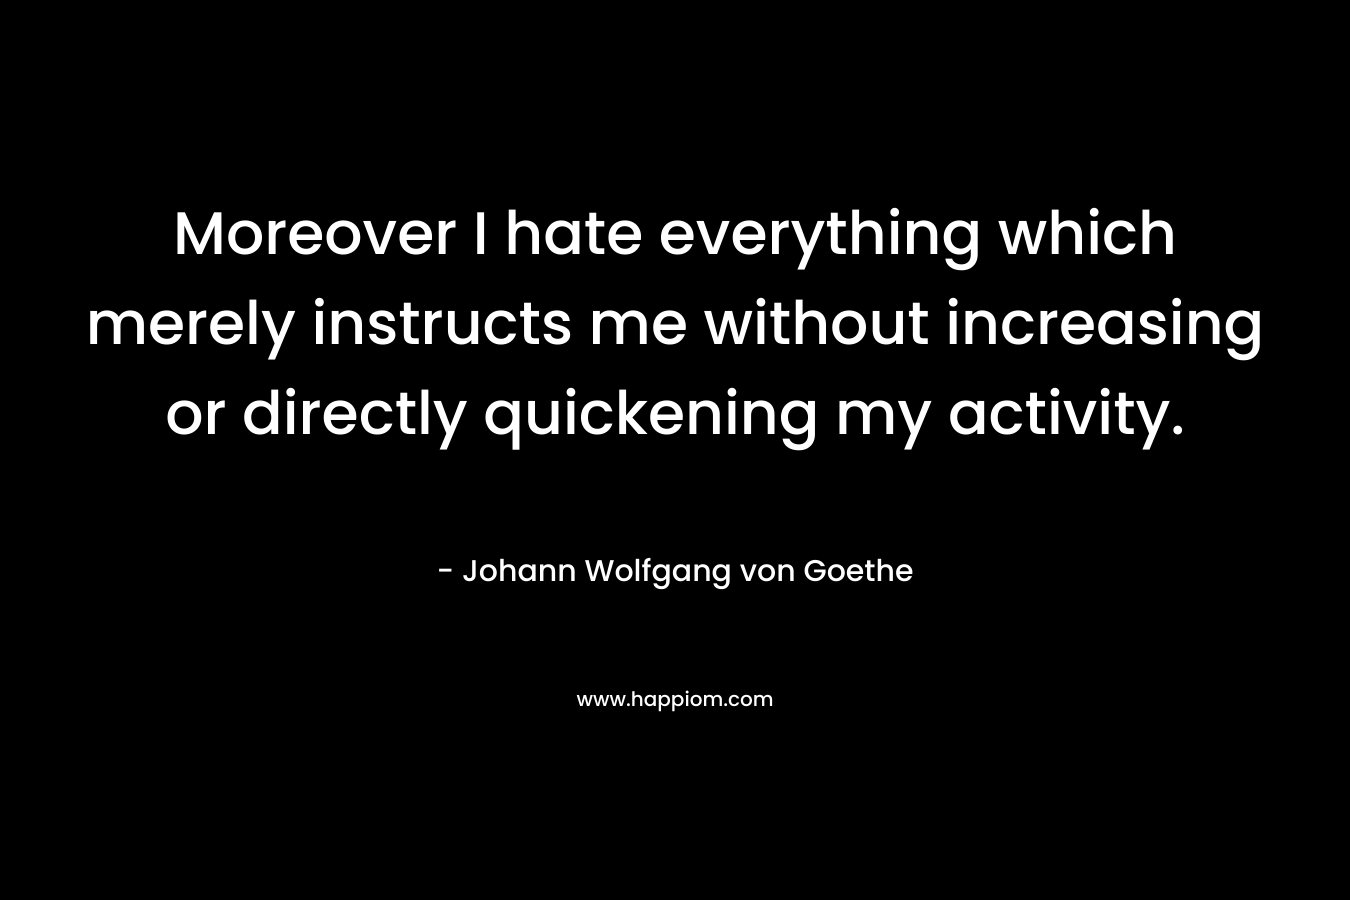 Moreover I hate everything which merely instructs me without increasing or directly quickening my activity.